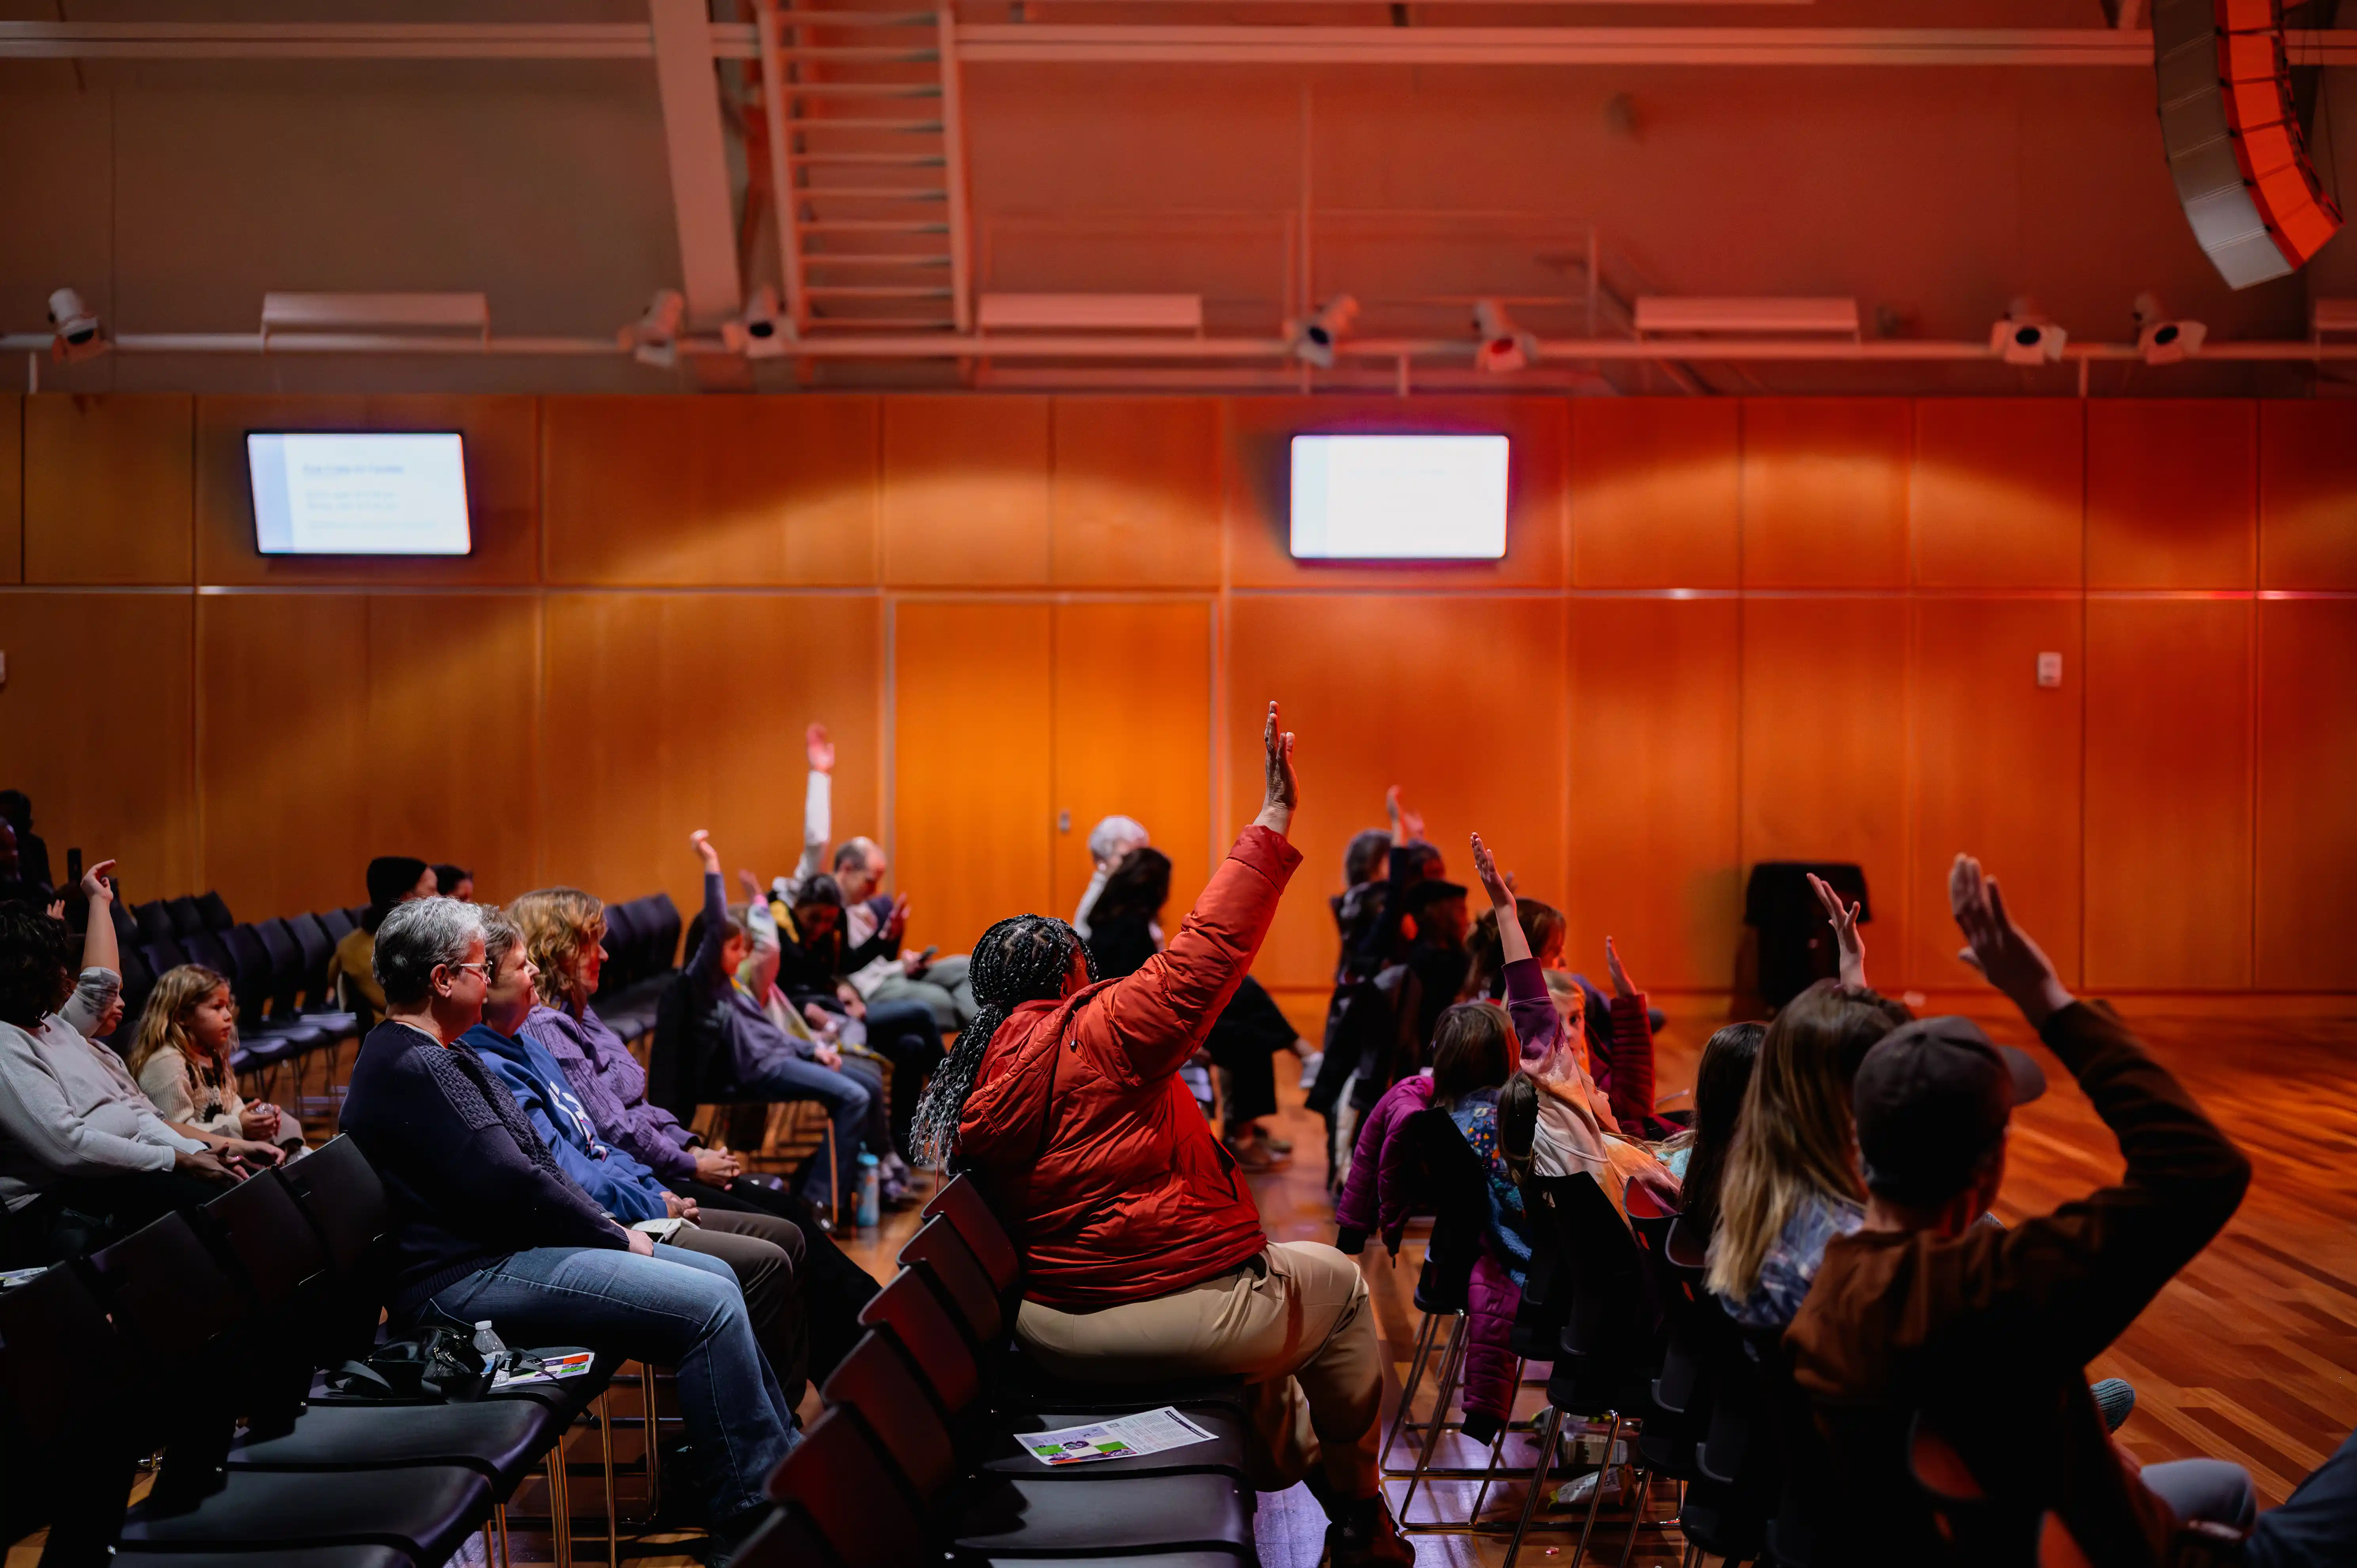 Audience members raising their hands in a conference room with warm lighting.